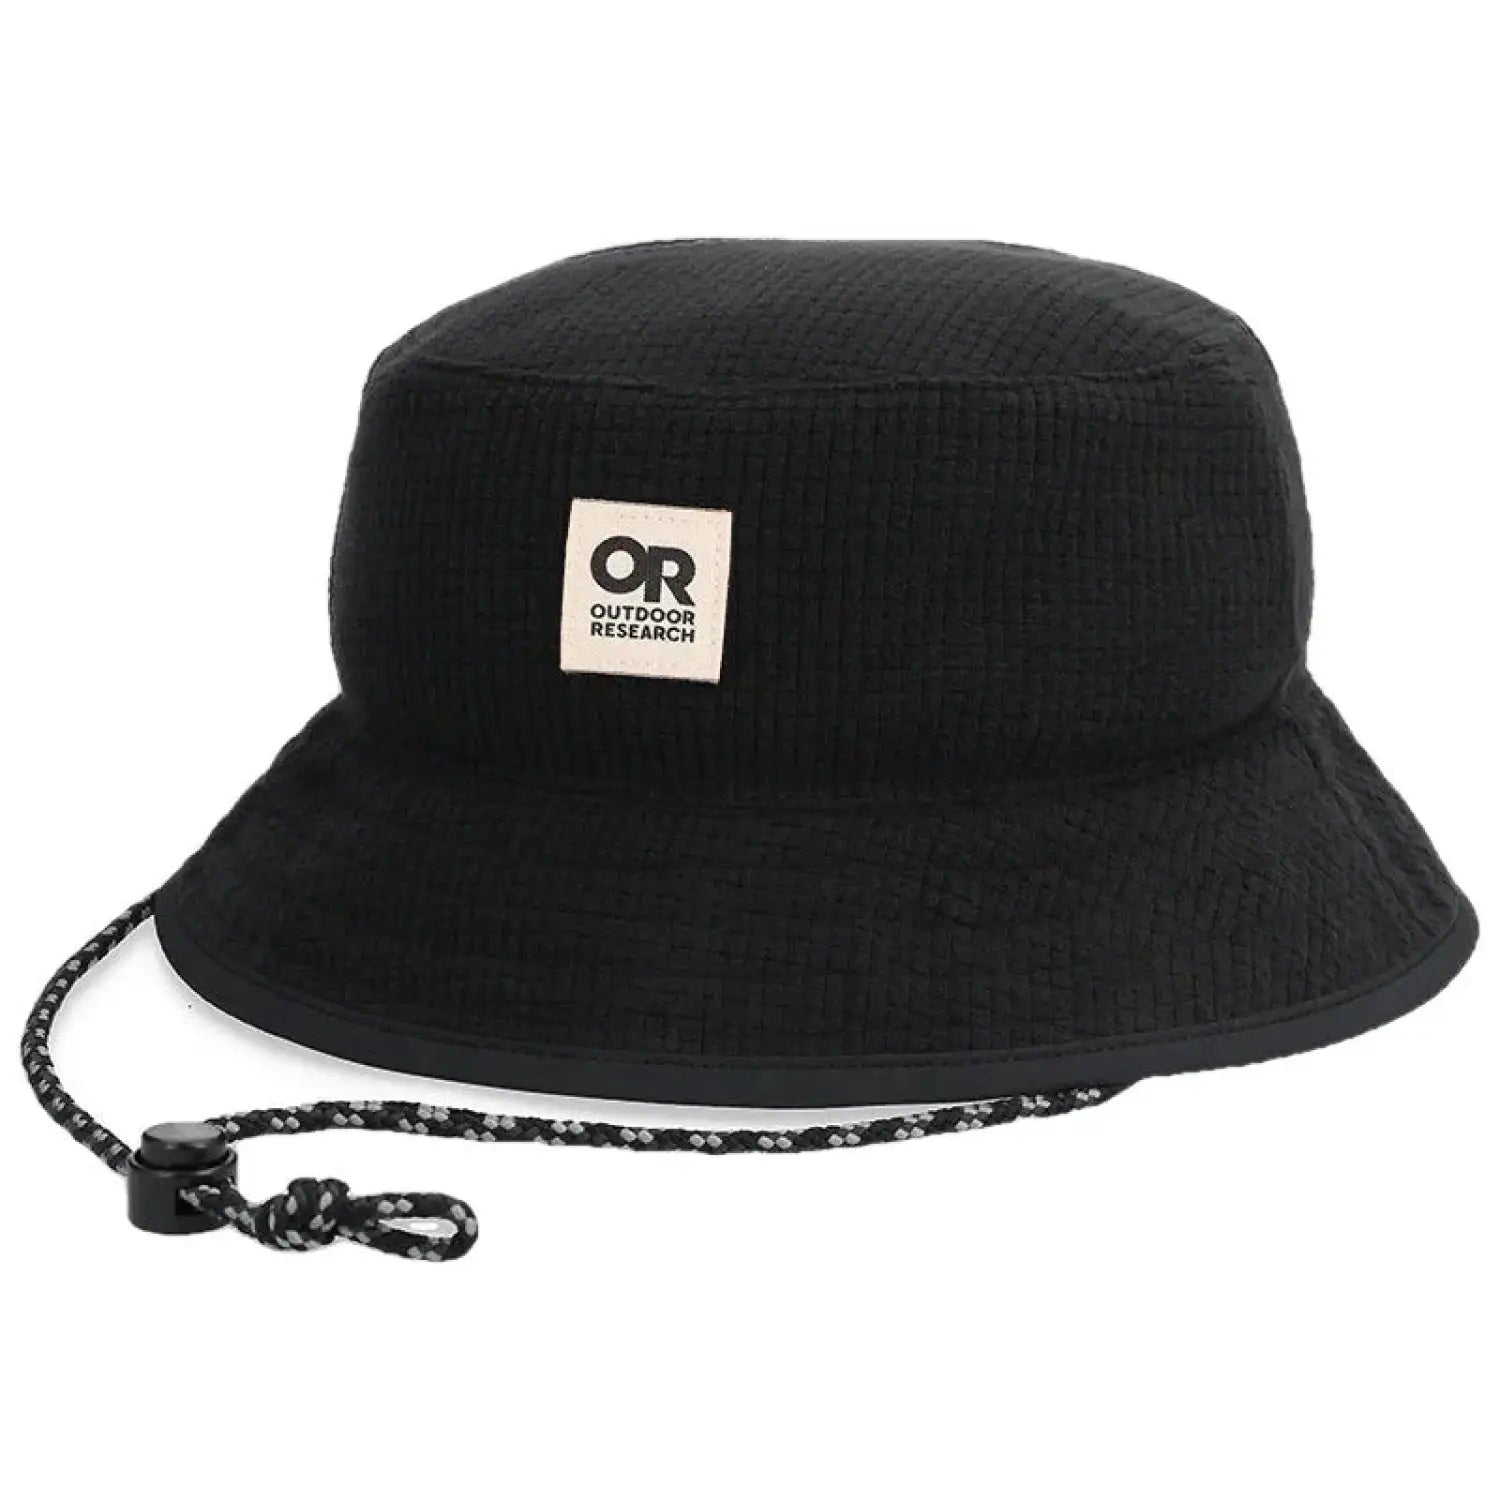 Outdoor Research Trail Mix Bucket Hat, Black, front view 